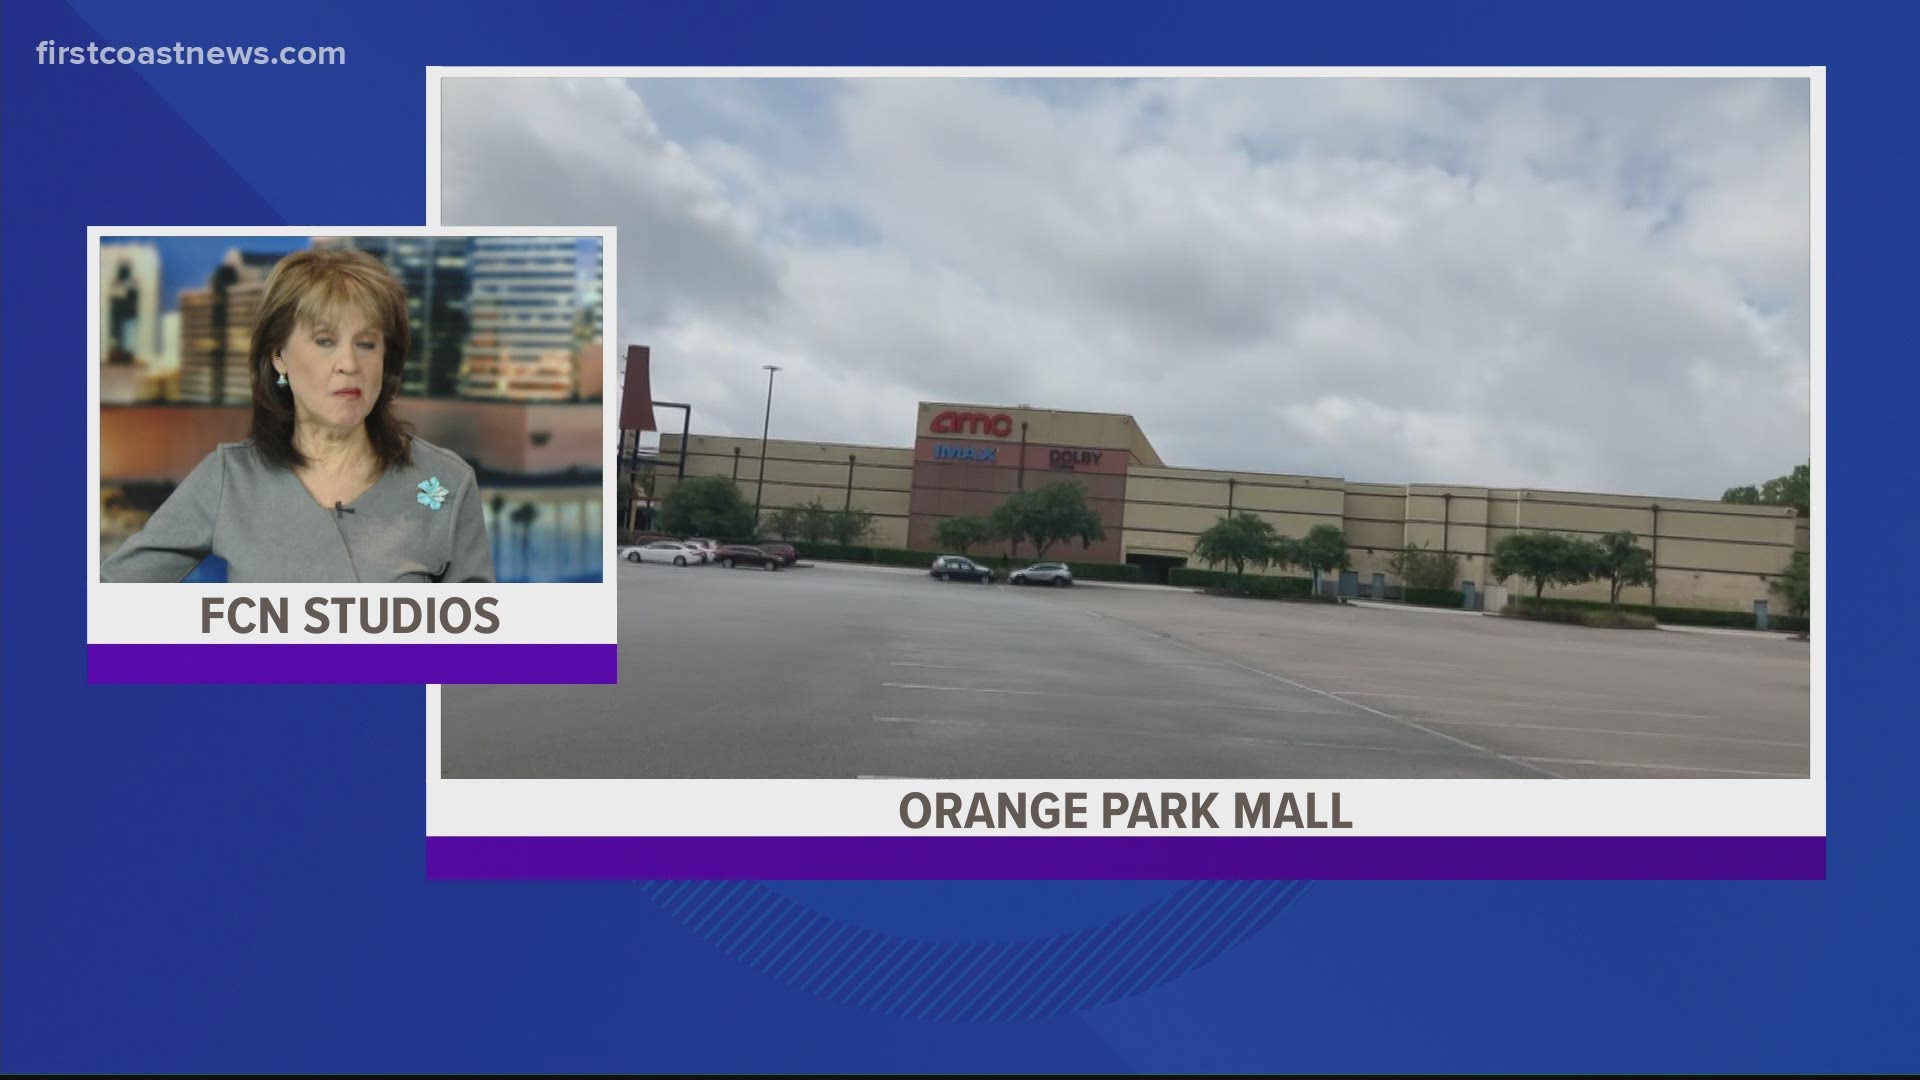 The owner of the mall said it will be business as usual at its properties across the country.